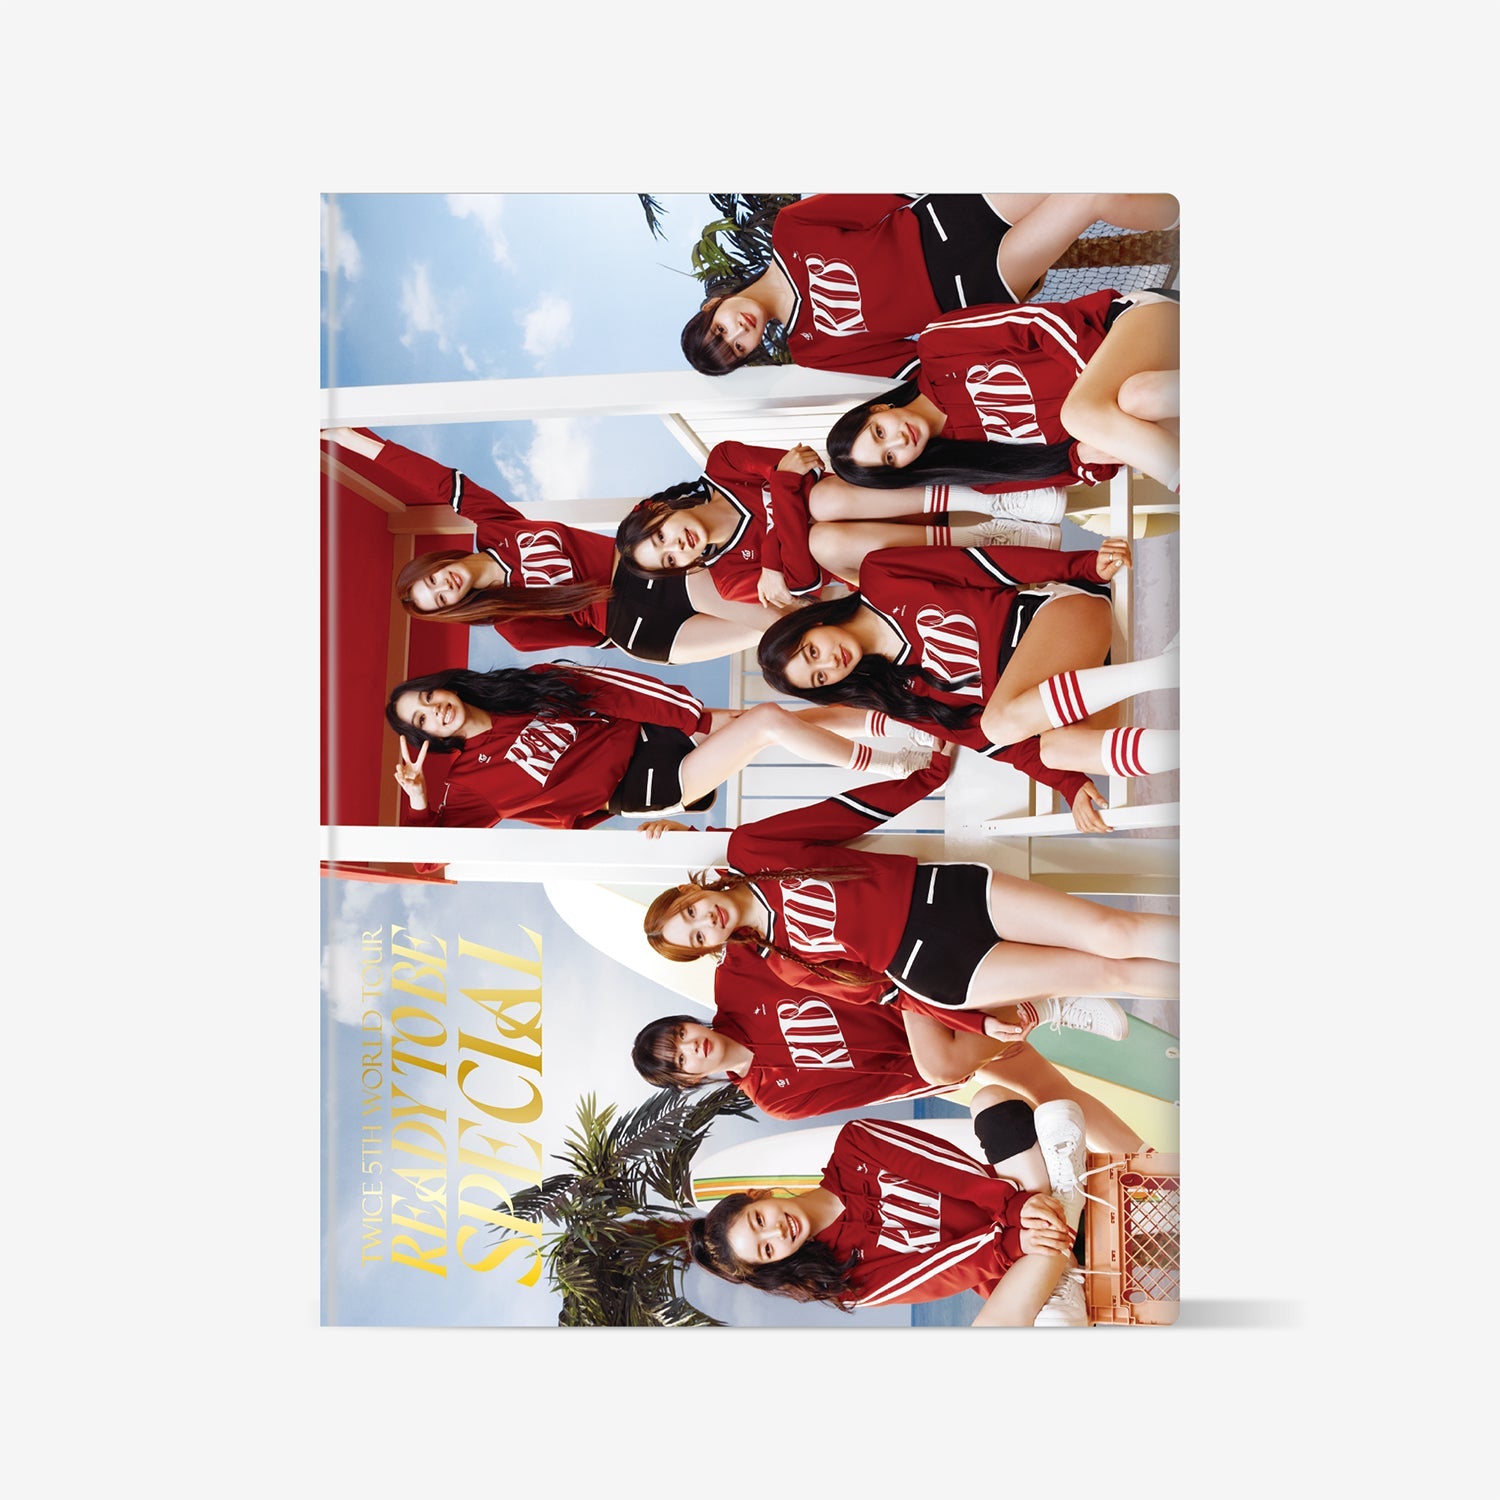 TRADING CARD CASE〈B〉【SPECIAL】/ TWICE『READY TO BE SPECIAL』